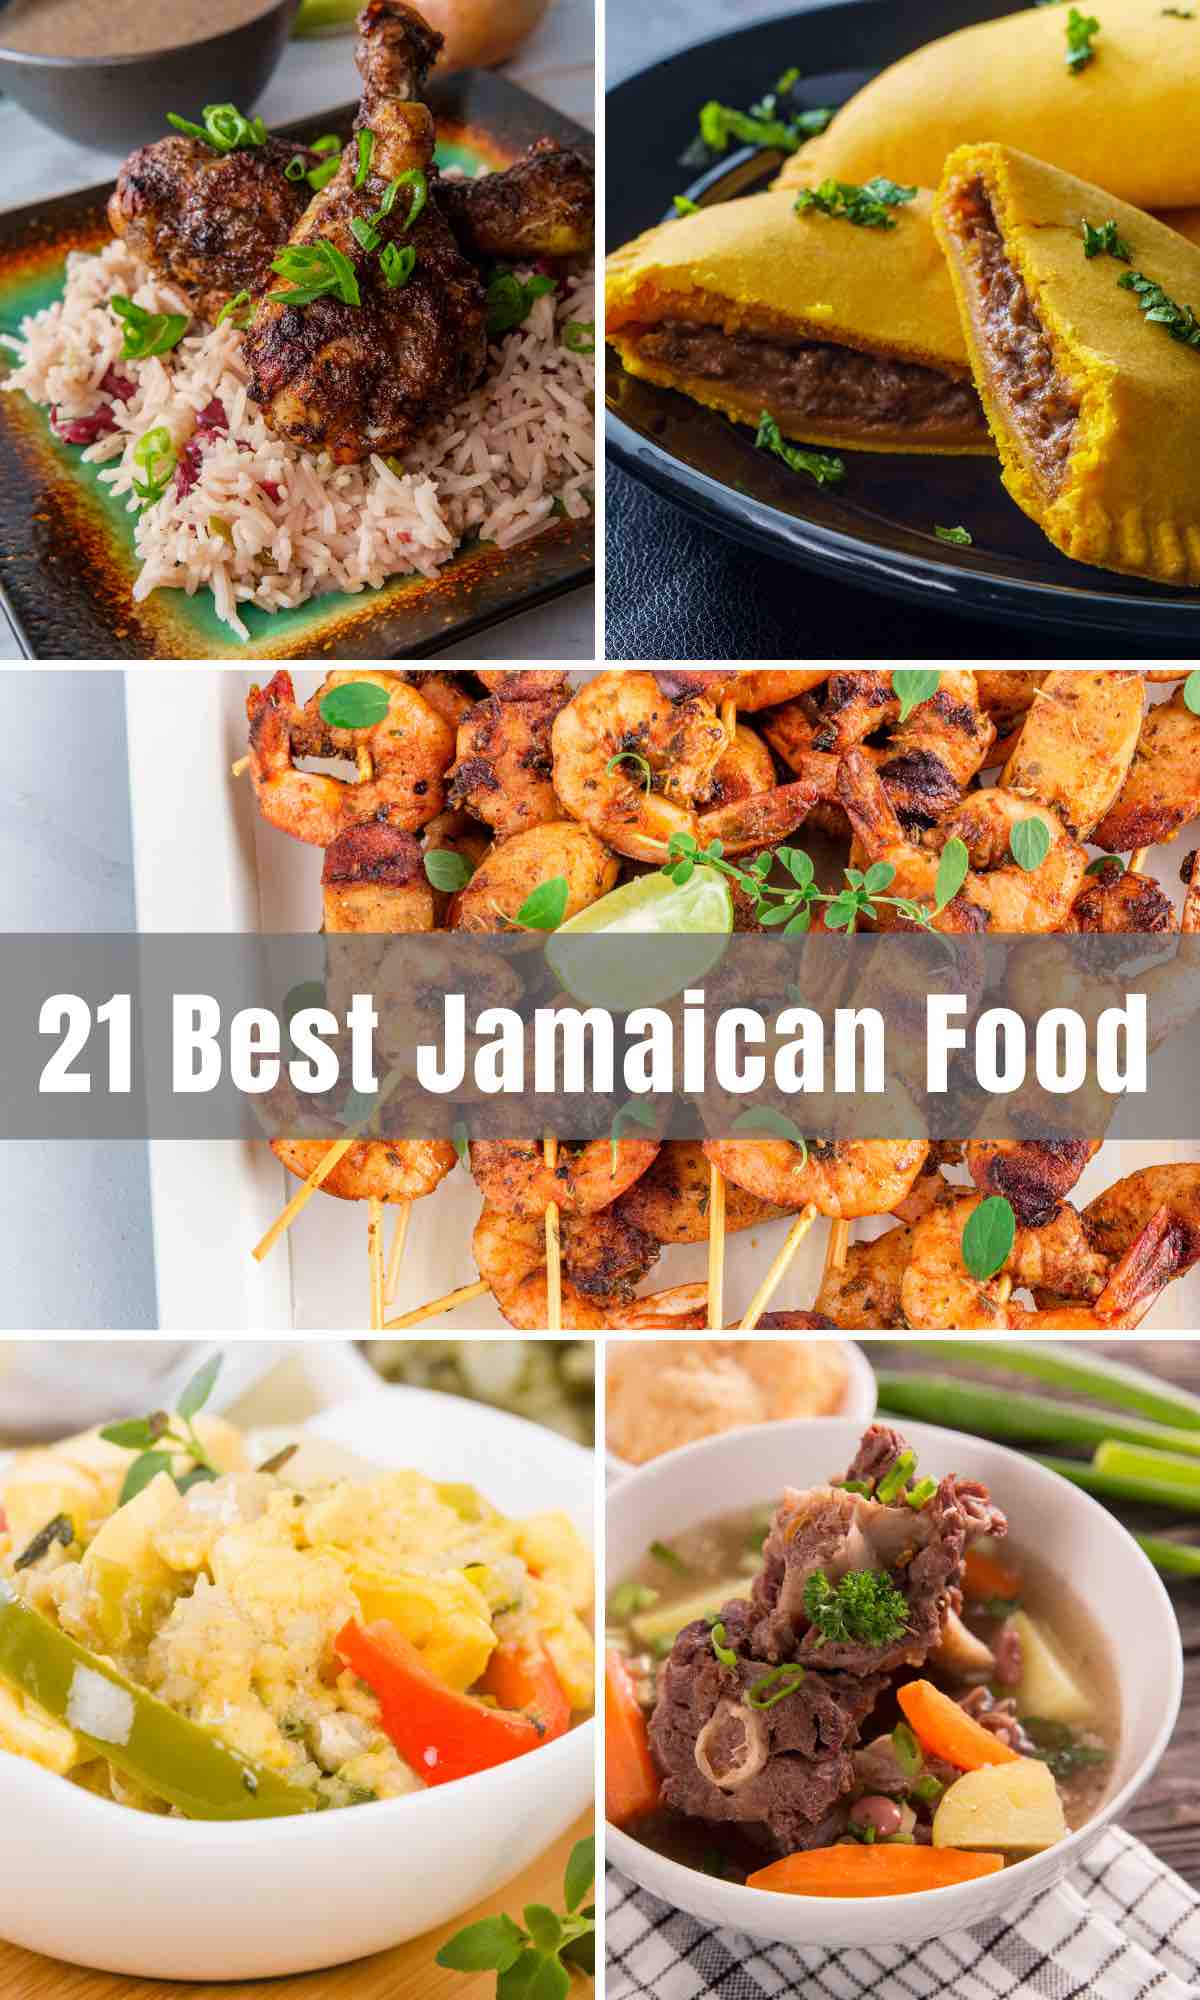 Jamaican Food is well-seasoned and full of flavor. For foodies, Jamaica is the destination for a tantalizing taste of the Caribbean. There are many irresistible and festival recipes besides Jerk Chicken. We’ve collected 21 traditional Jamaican recipes that are incredibly delicious. 